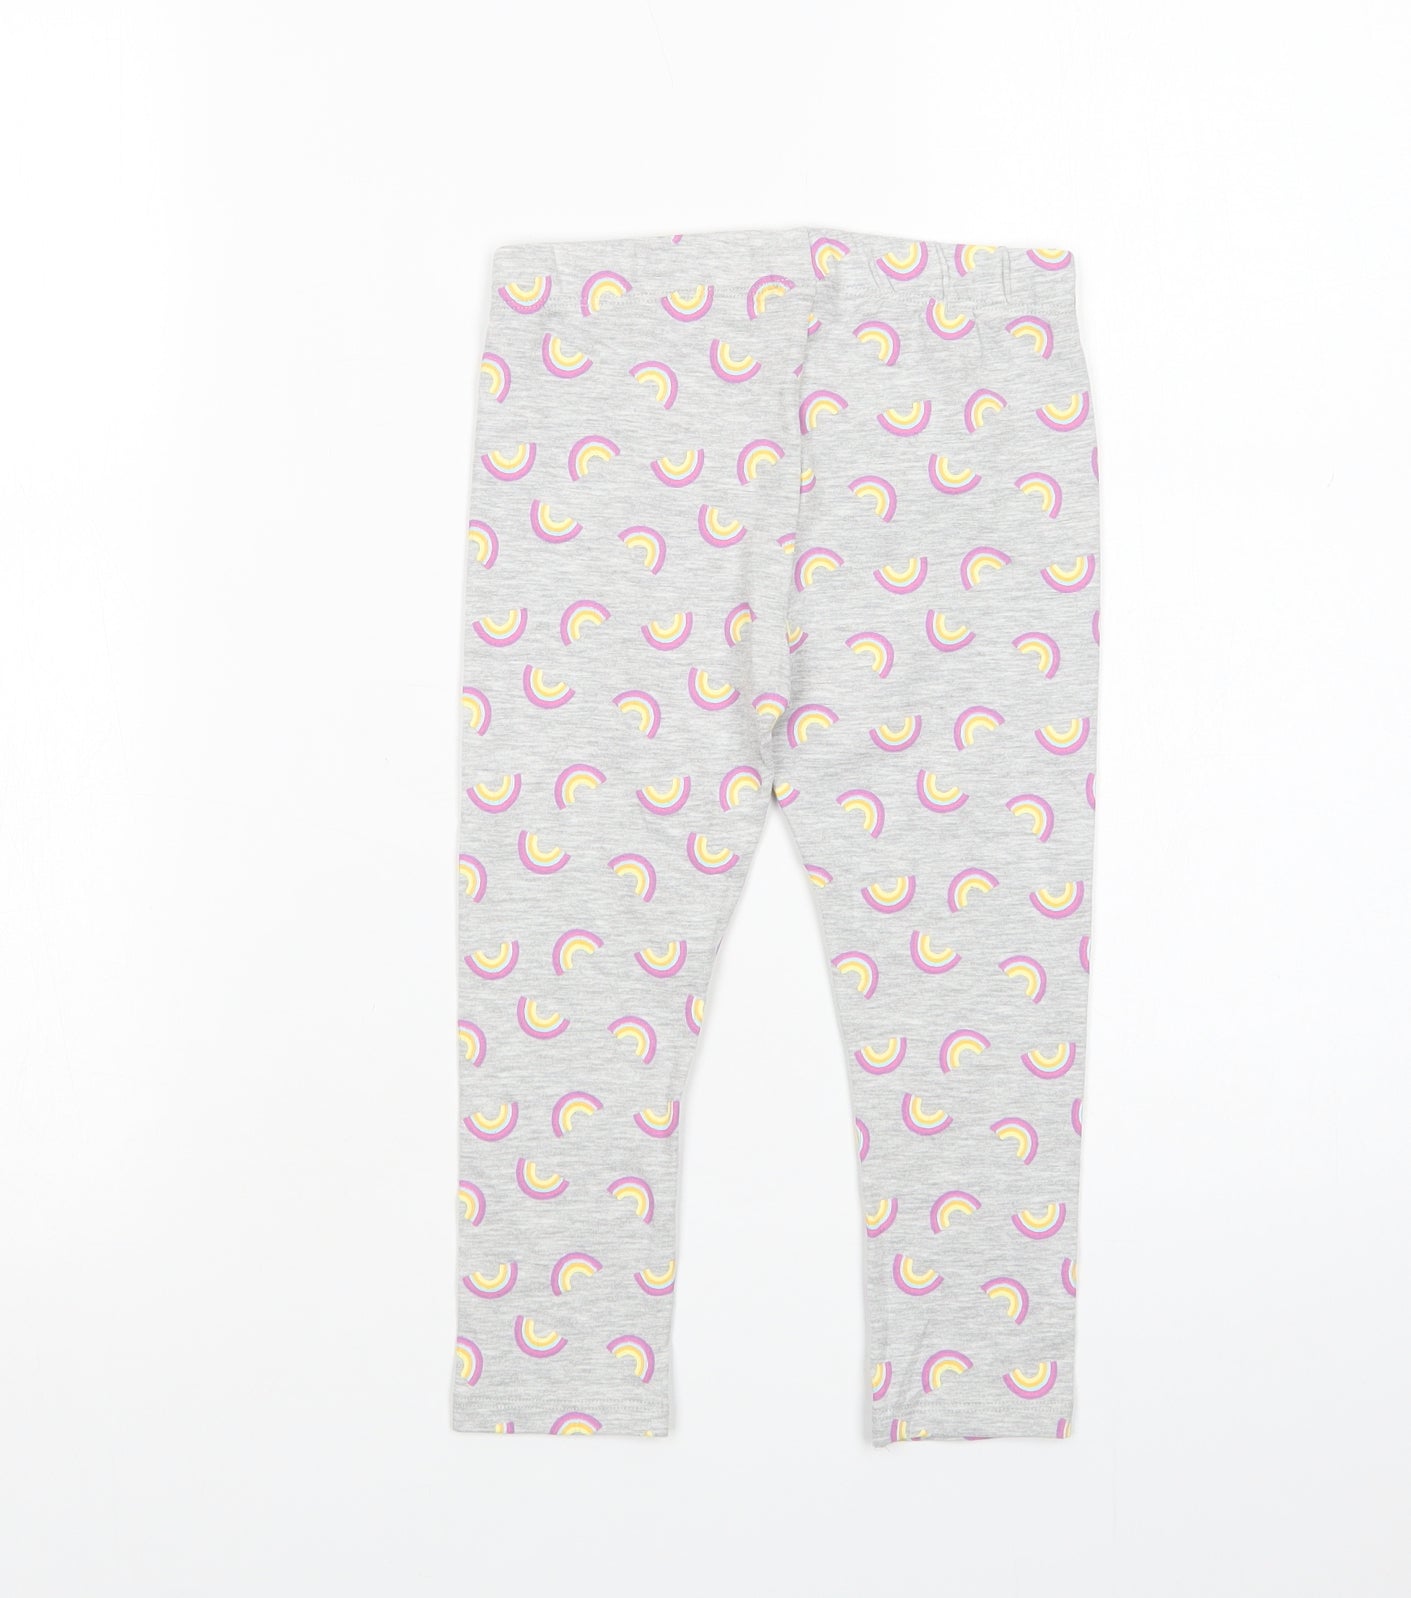 Dunnes Stores Girls Grey Geometric Cotton Jegging Trousers Size 5-6 Years  Regular  - Rainbow Print